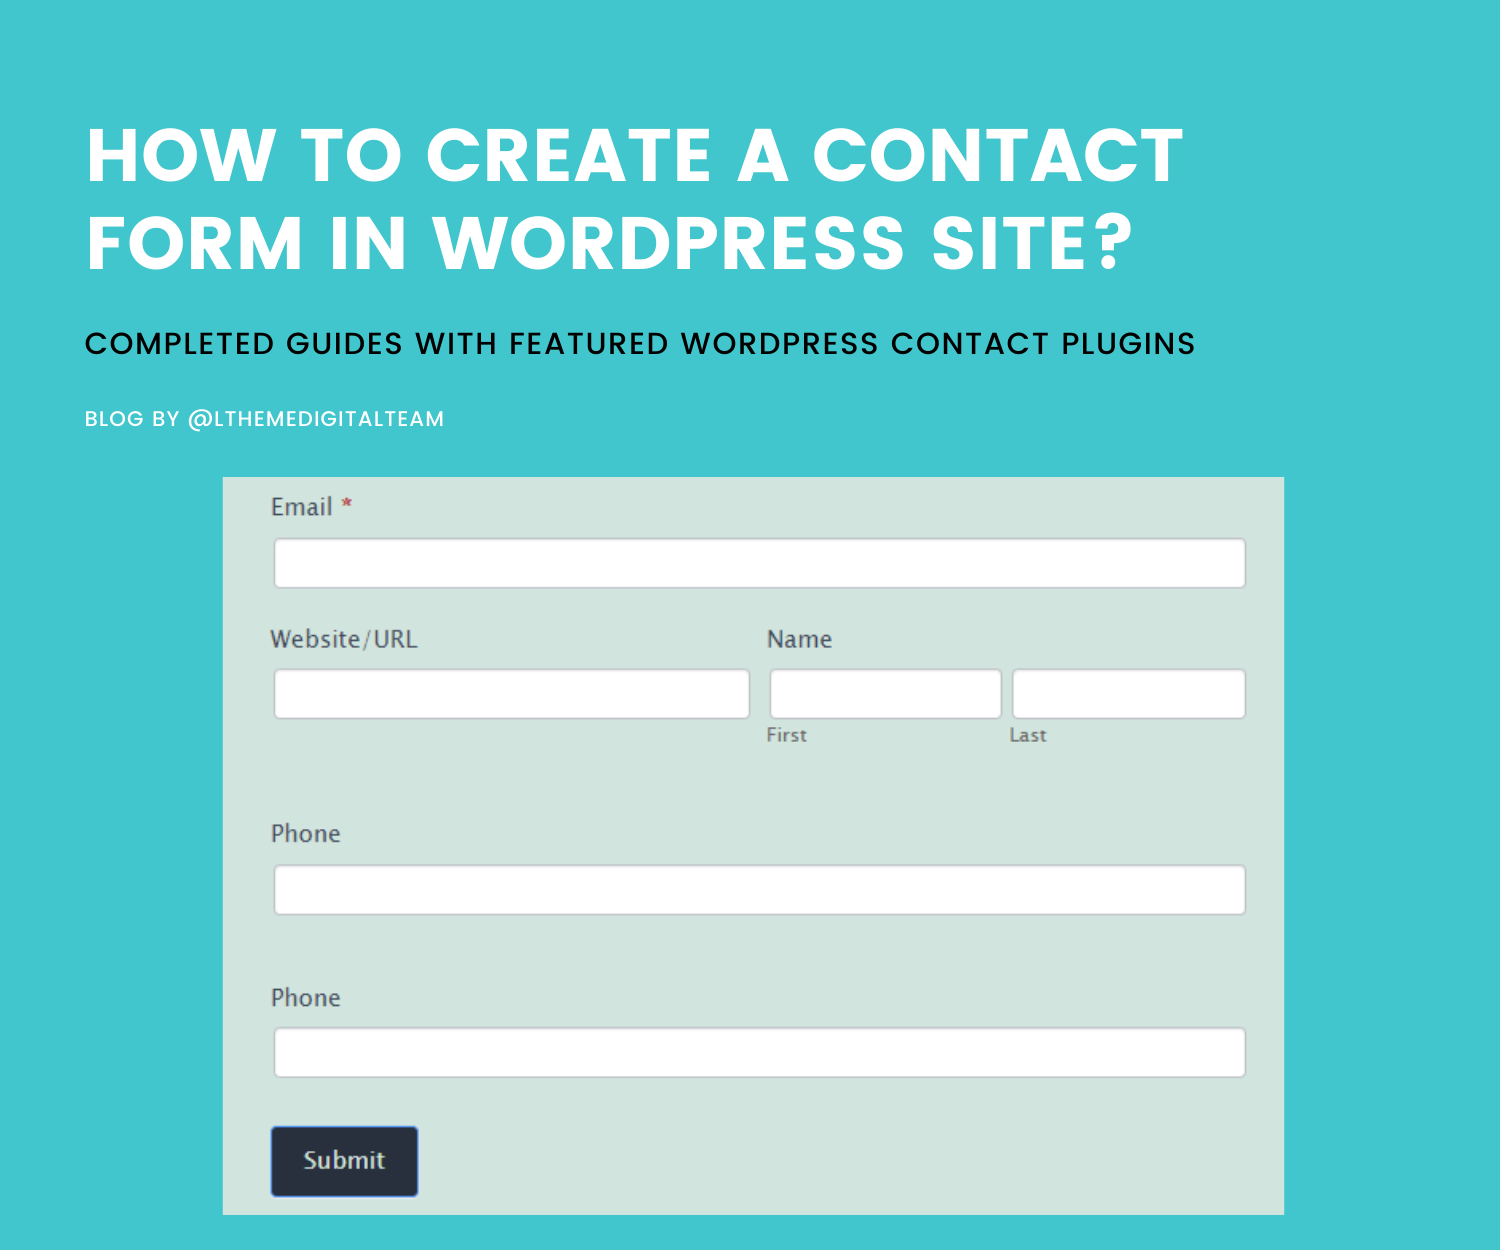 How to create a contact form in WordPress sites?